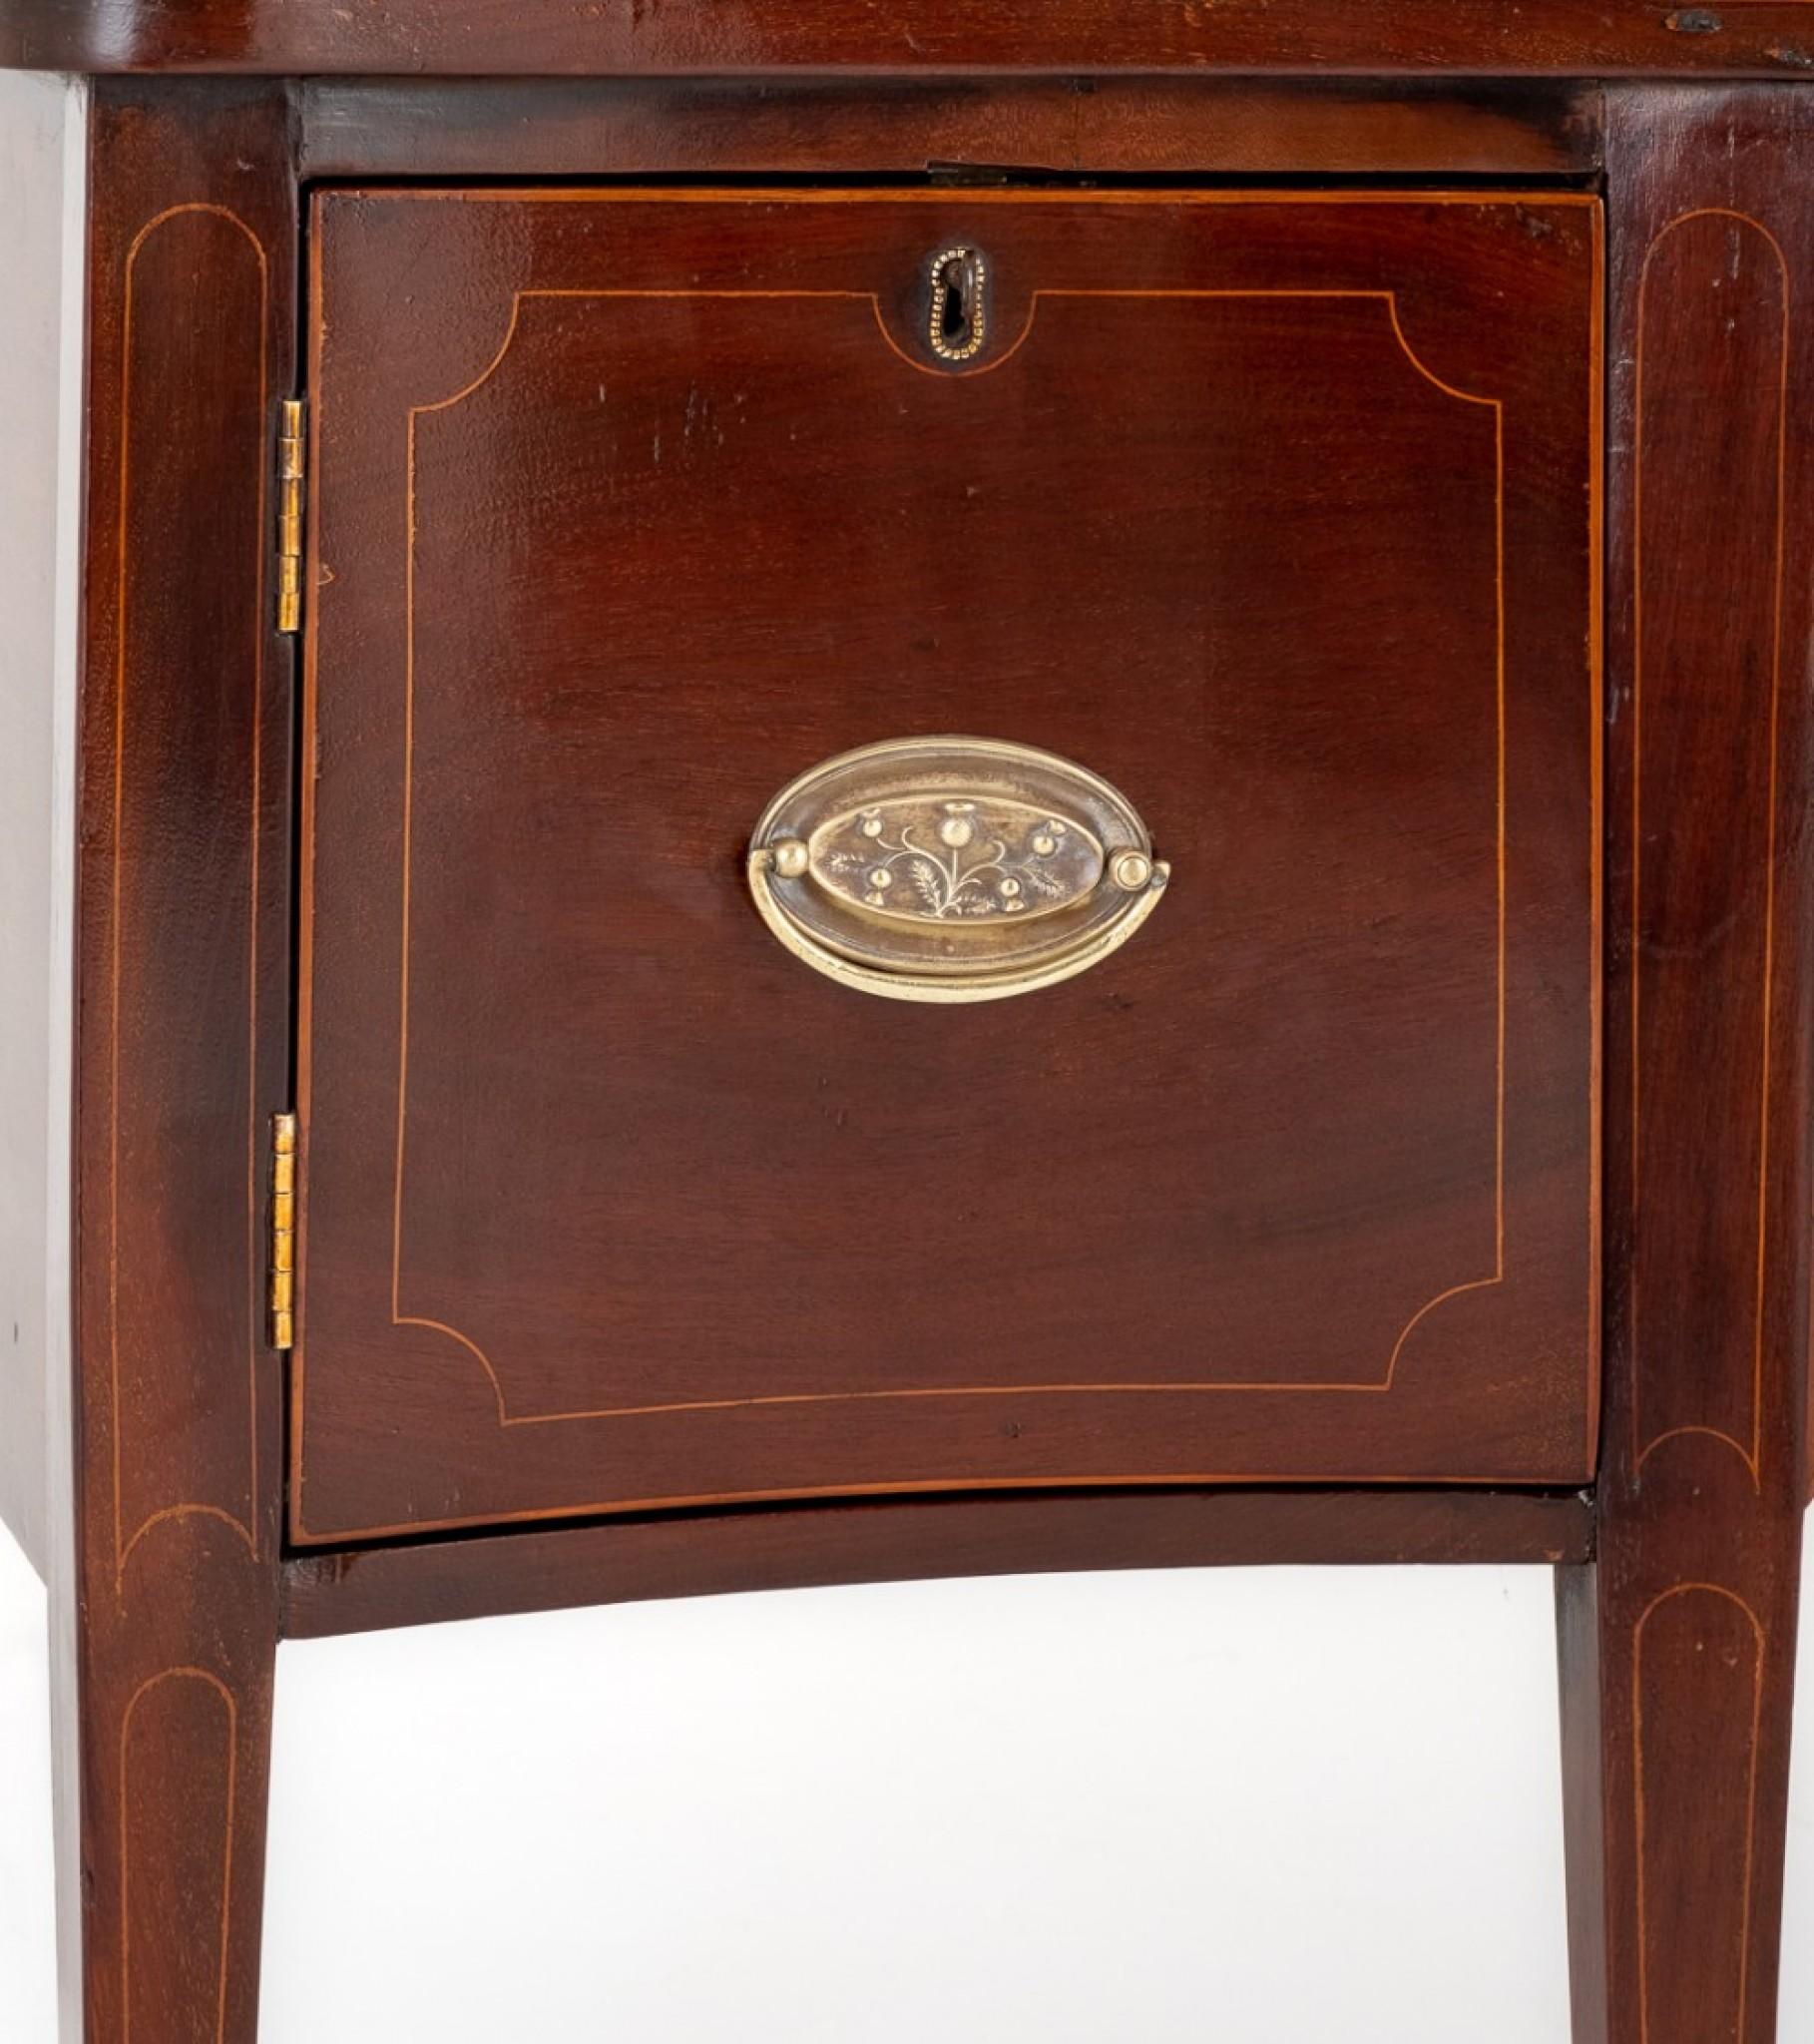 Here We Have a Georgian Revival Mahogany Sideboard of Small Proportions.
Standing Upon Tapered legs With Spade Feet.
Circa 1900
Featuring a Central Drawer Flanked By Cupboards.
The Drawer and Door Fronts Having Boxwood Line Inlays and Oval Embossed